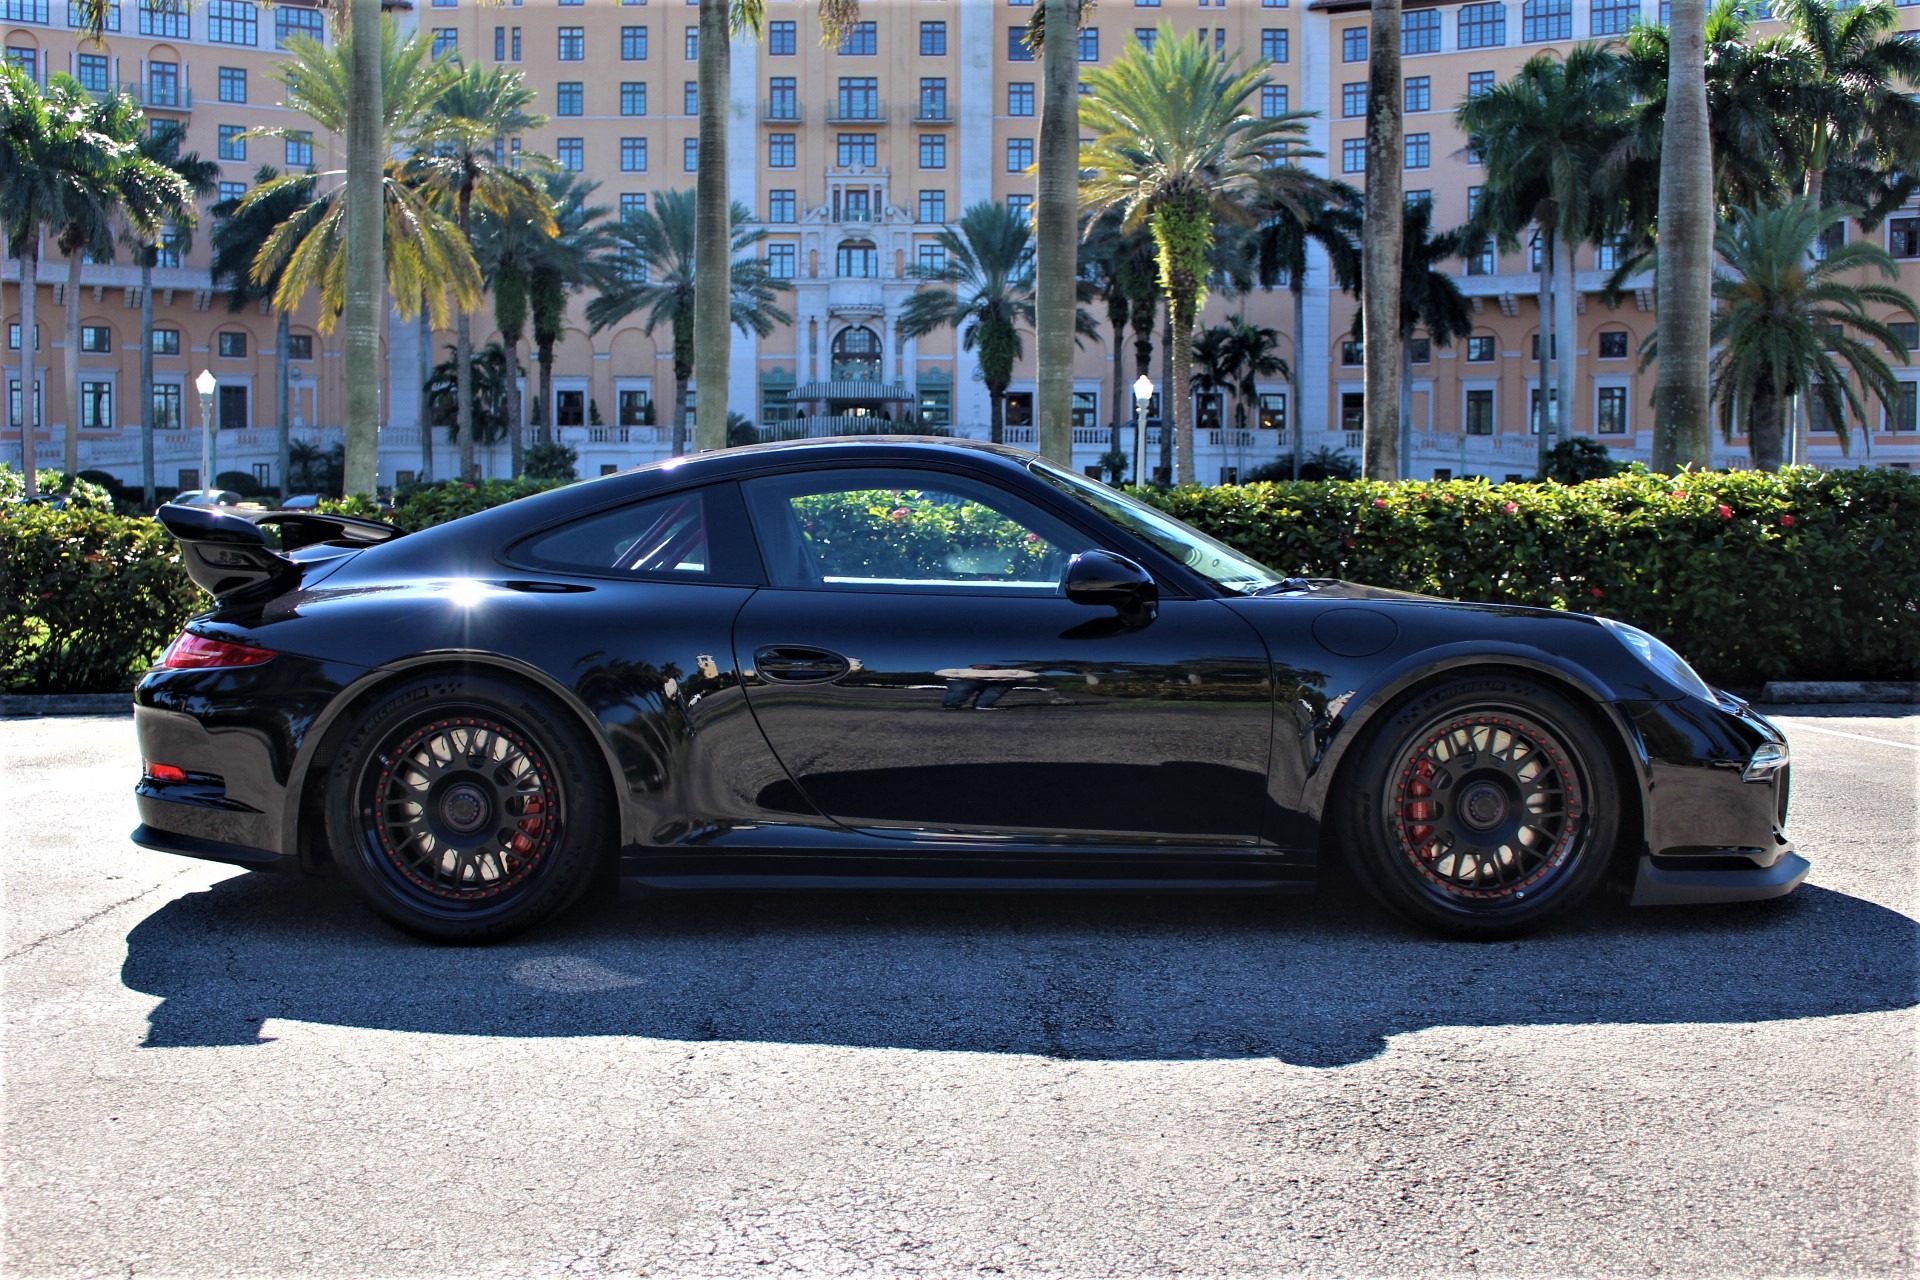 Used 2015 Porsche 911 GT3 for sale Sold at The Gables Sports Cars in Miami FL 33146 1